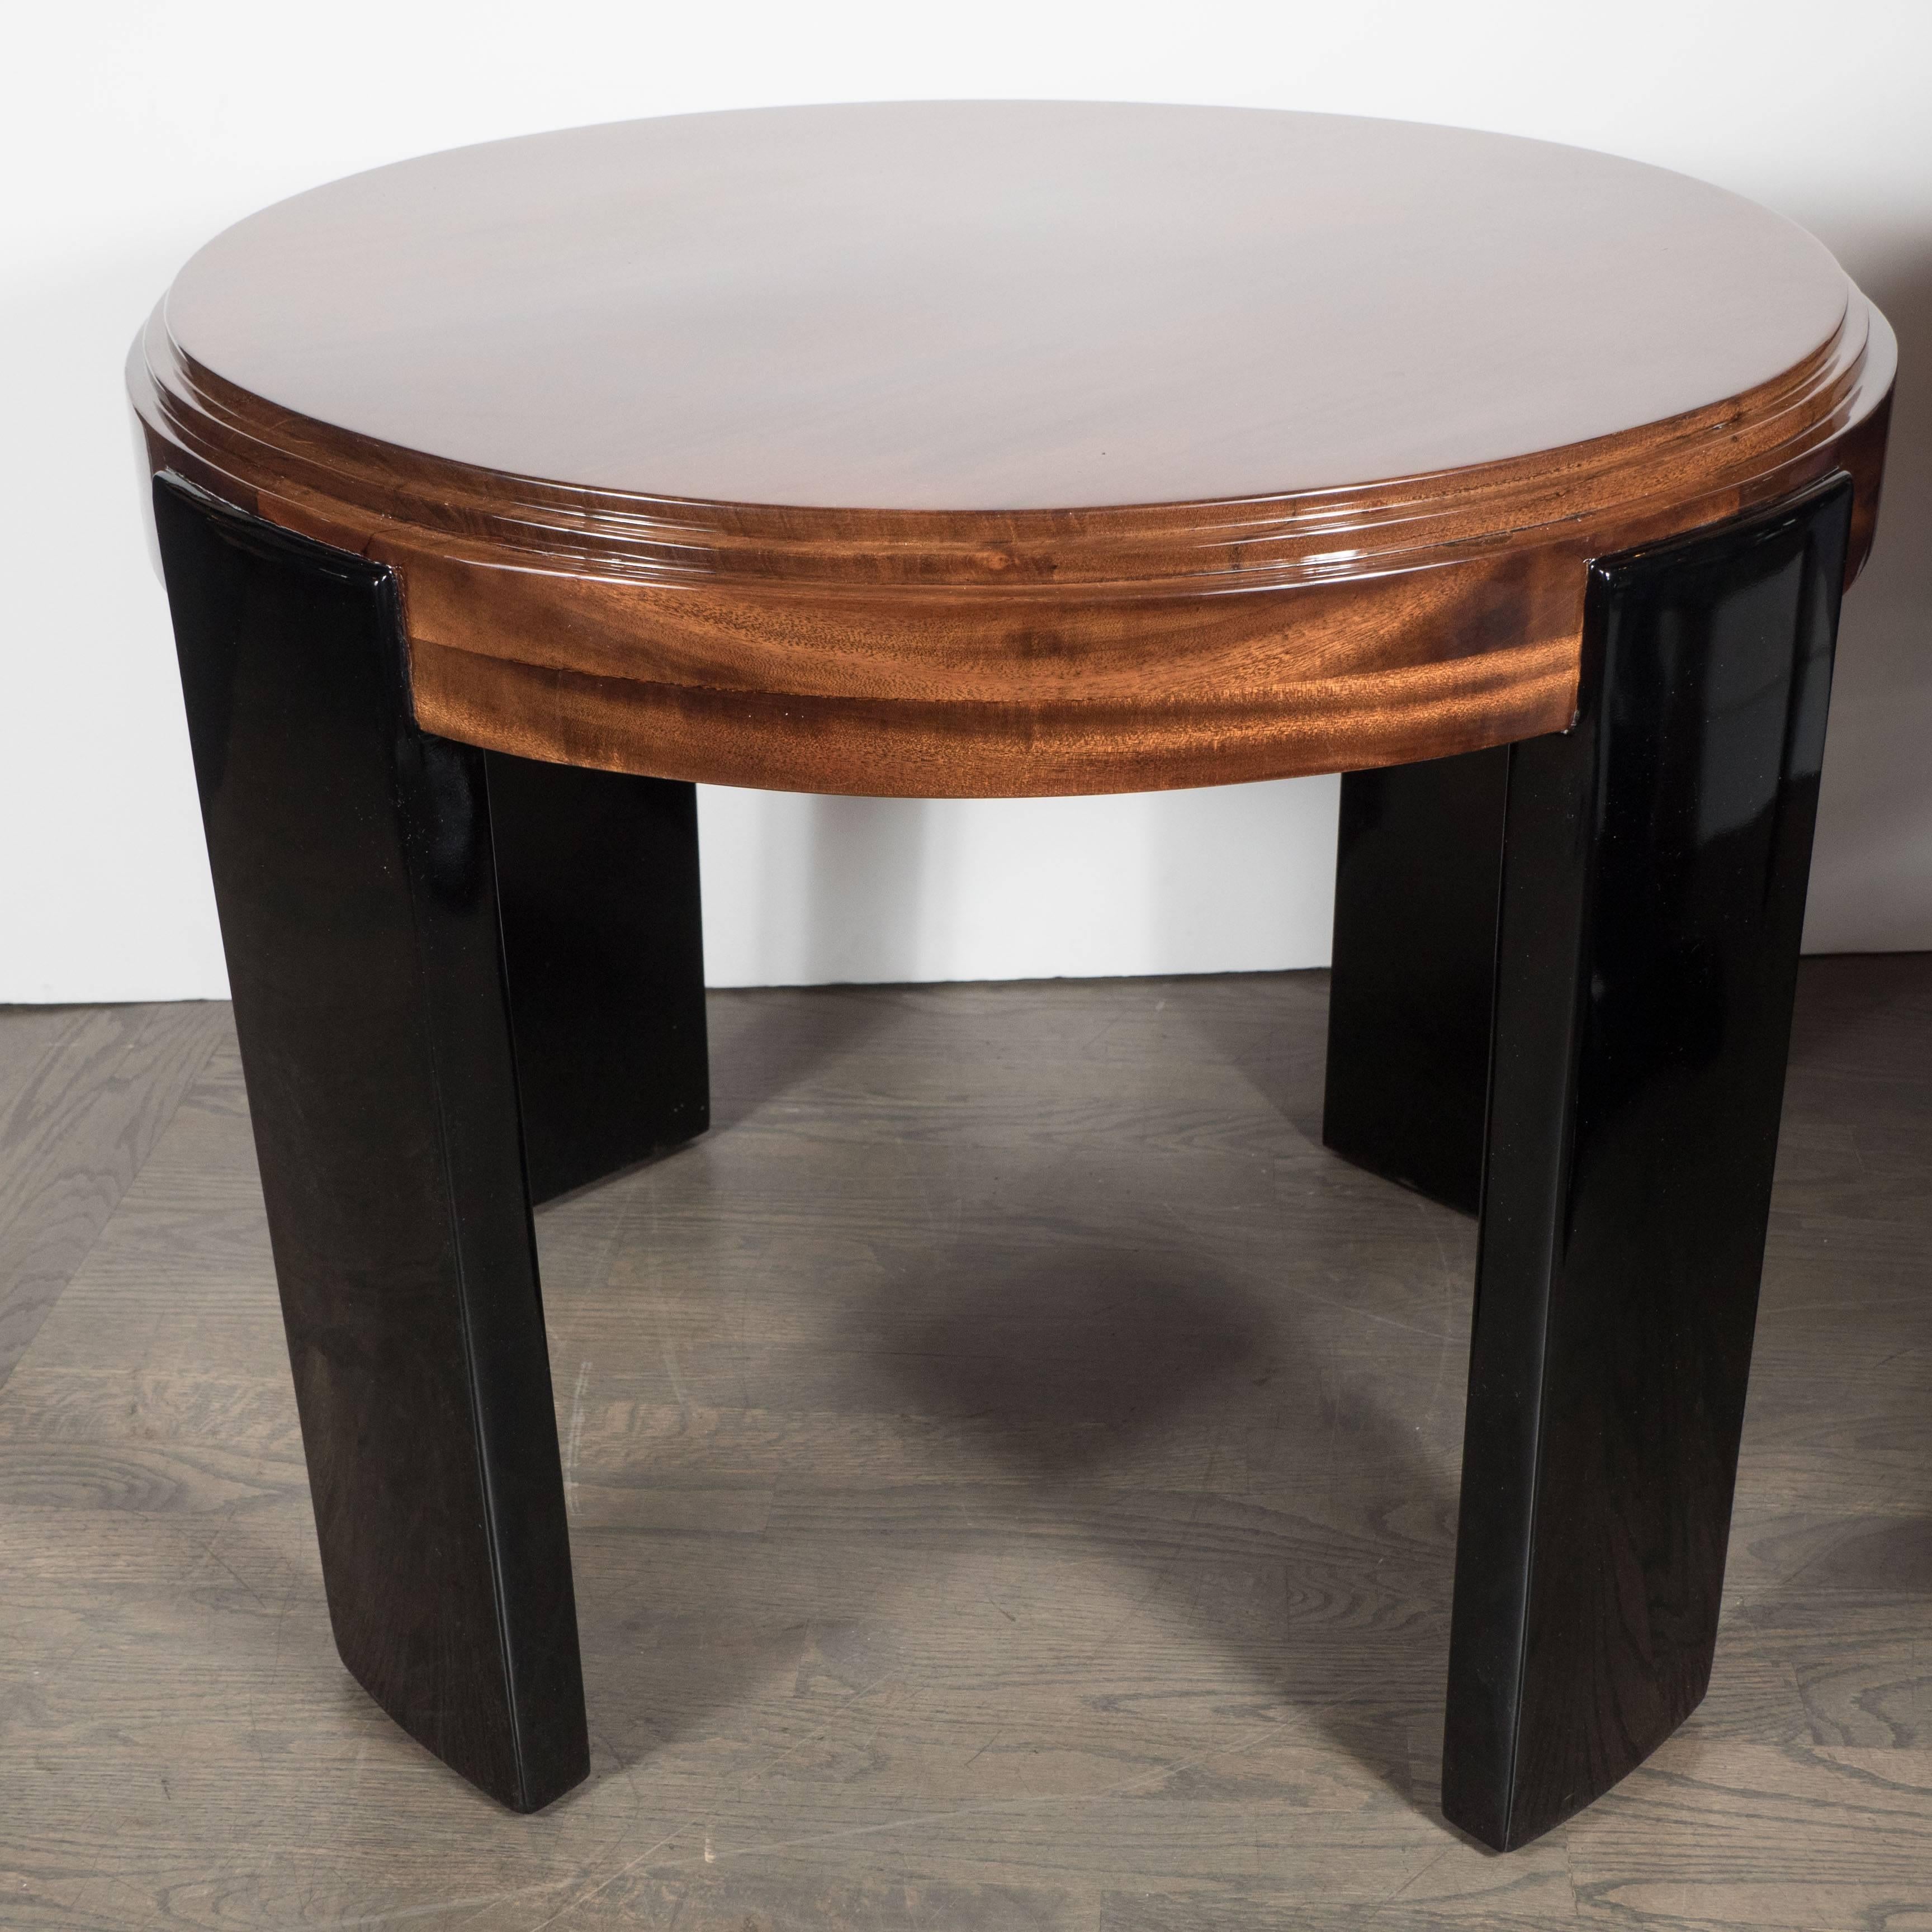 Art Deco skyscraper style stepped detail side table with black lacquer legs, American, circa 1935. This stunning table features a Streamline Art Deco design with a stepped design on the skyscraper style pedestal bases. This table exemplifies the